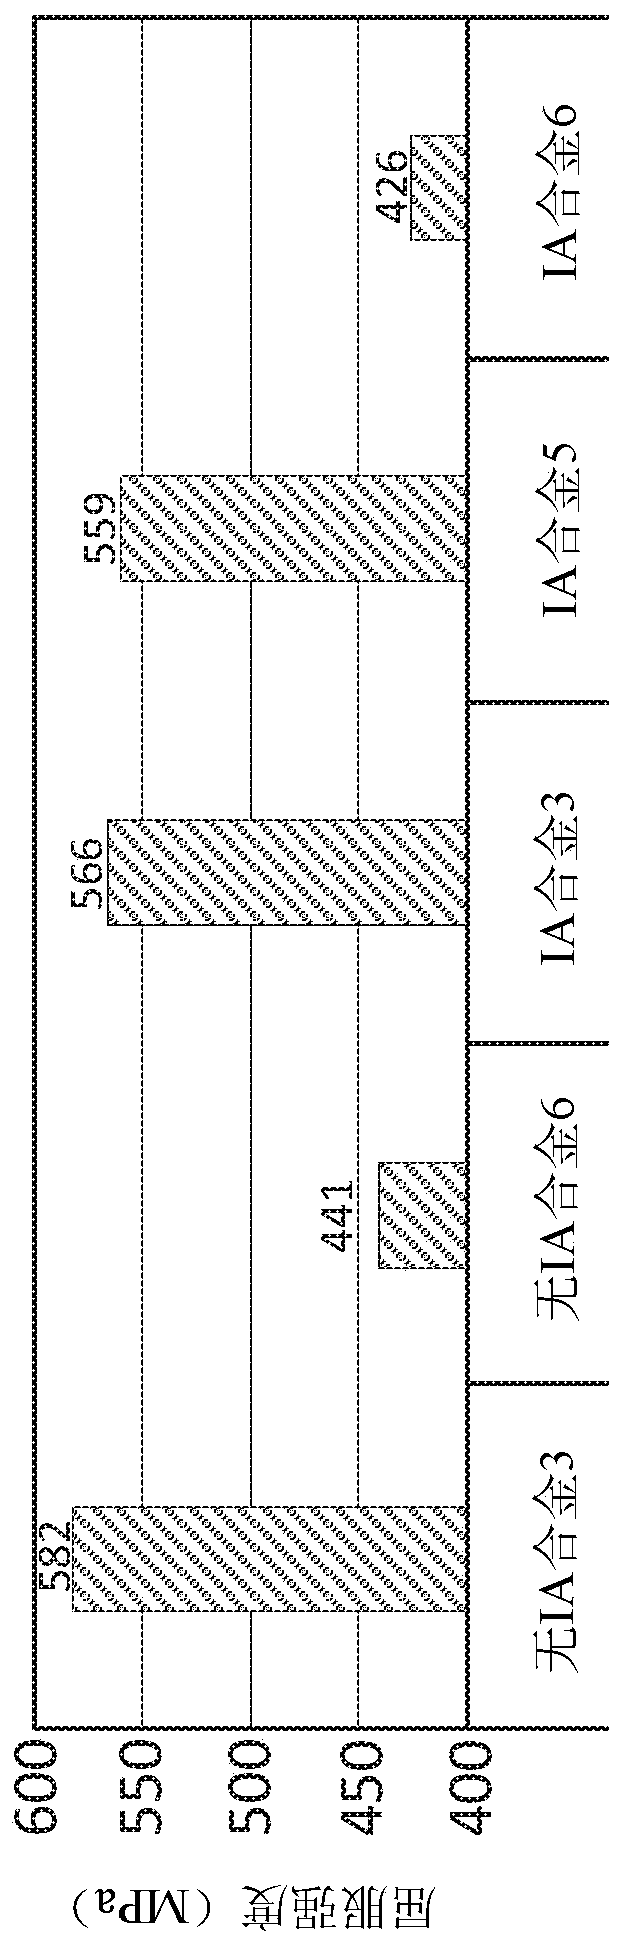 Rapid aging of high strength 7xxx aluminum alloys and methods of making the same